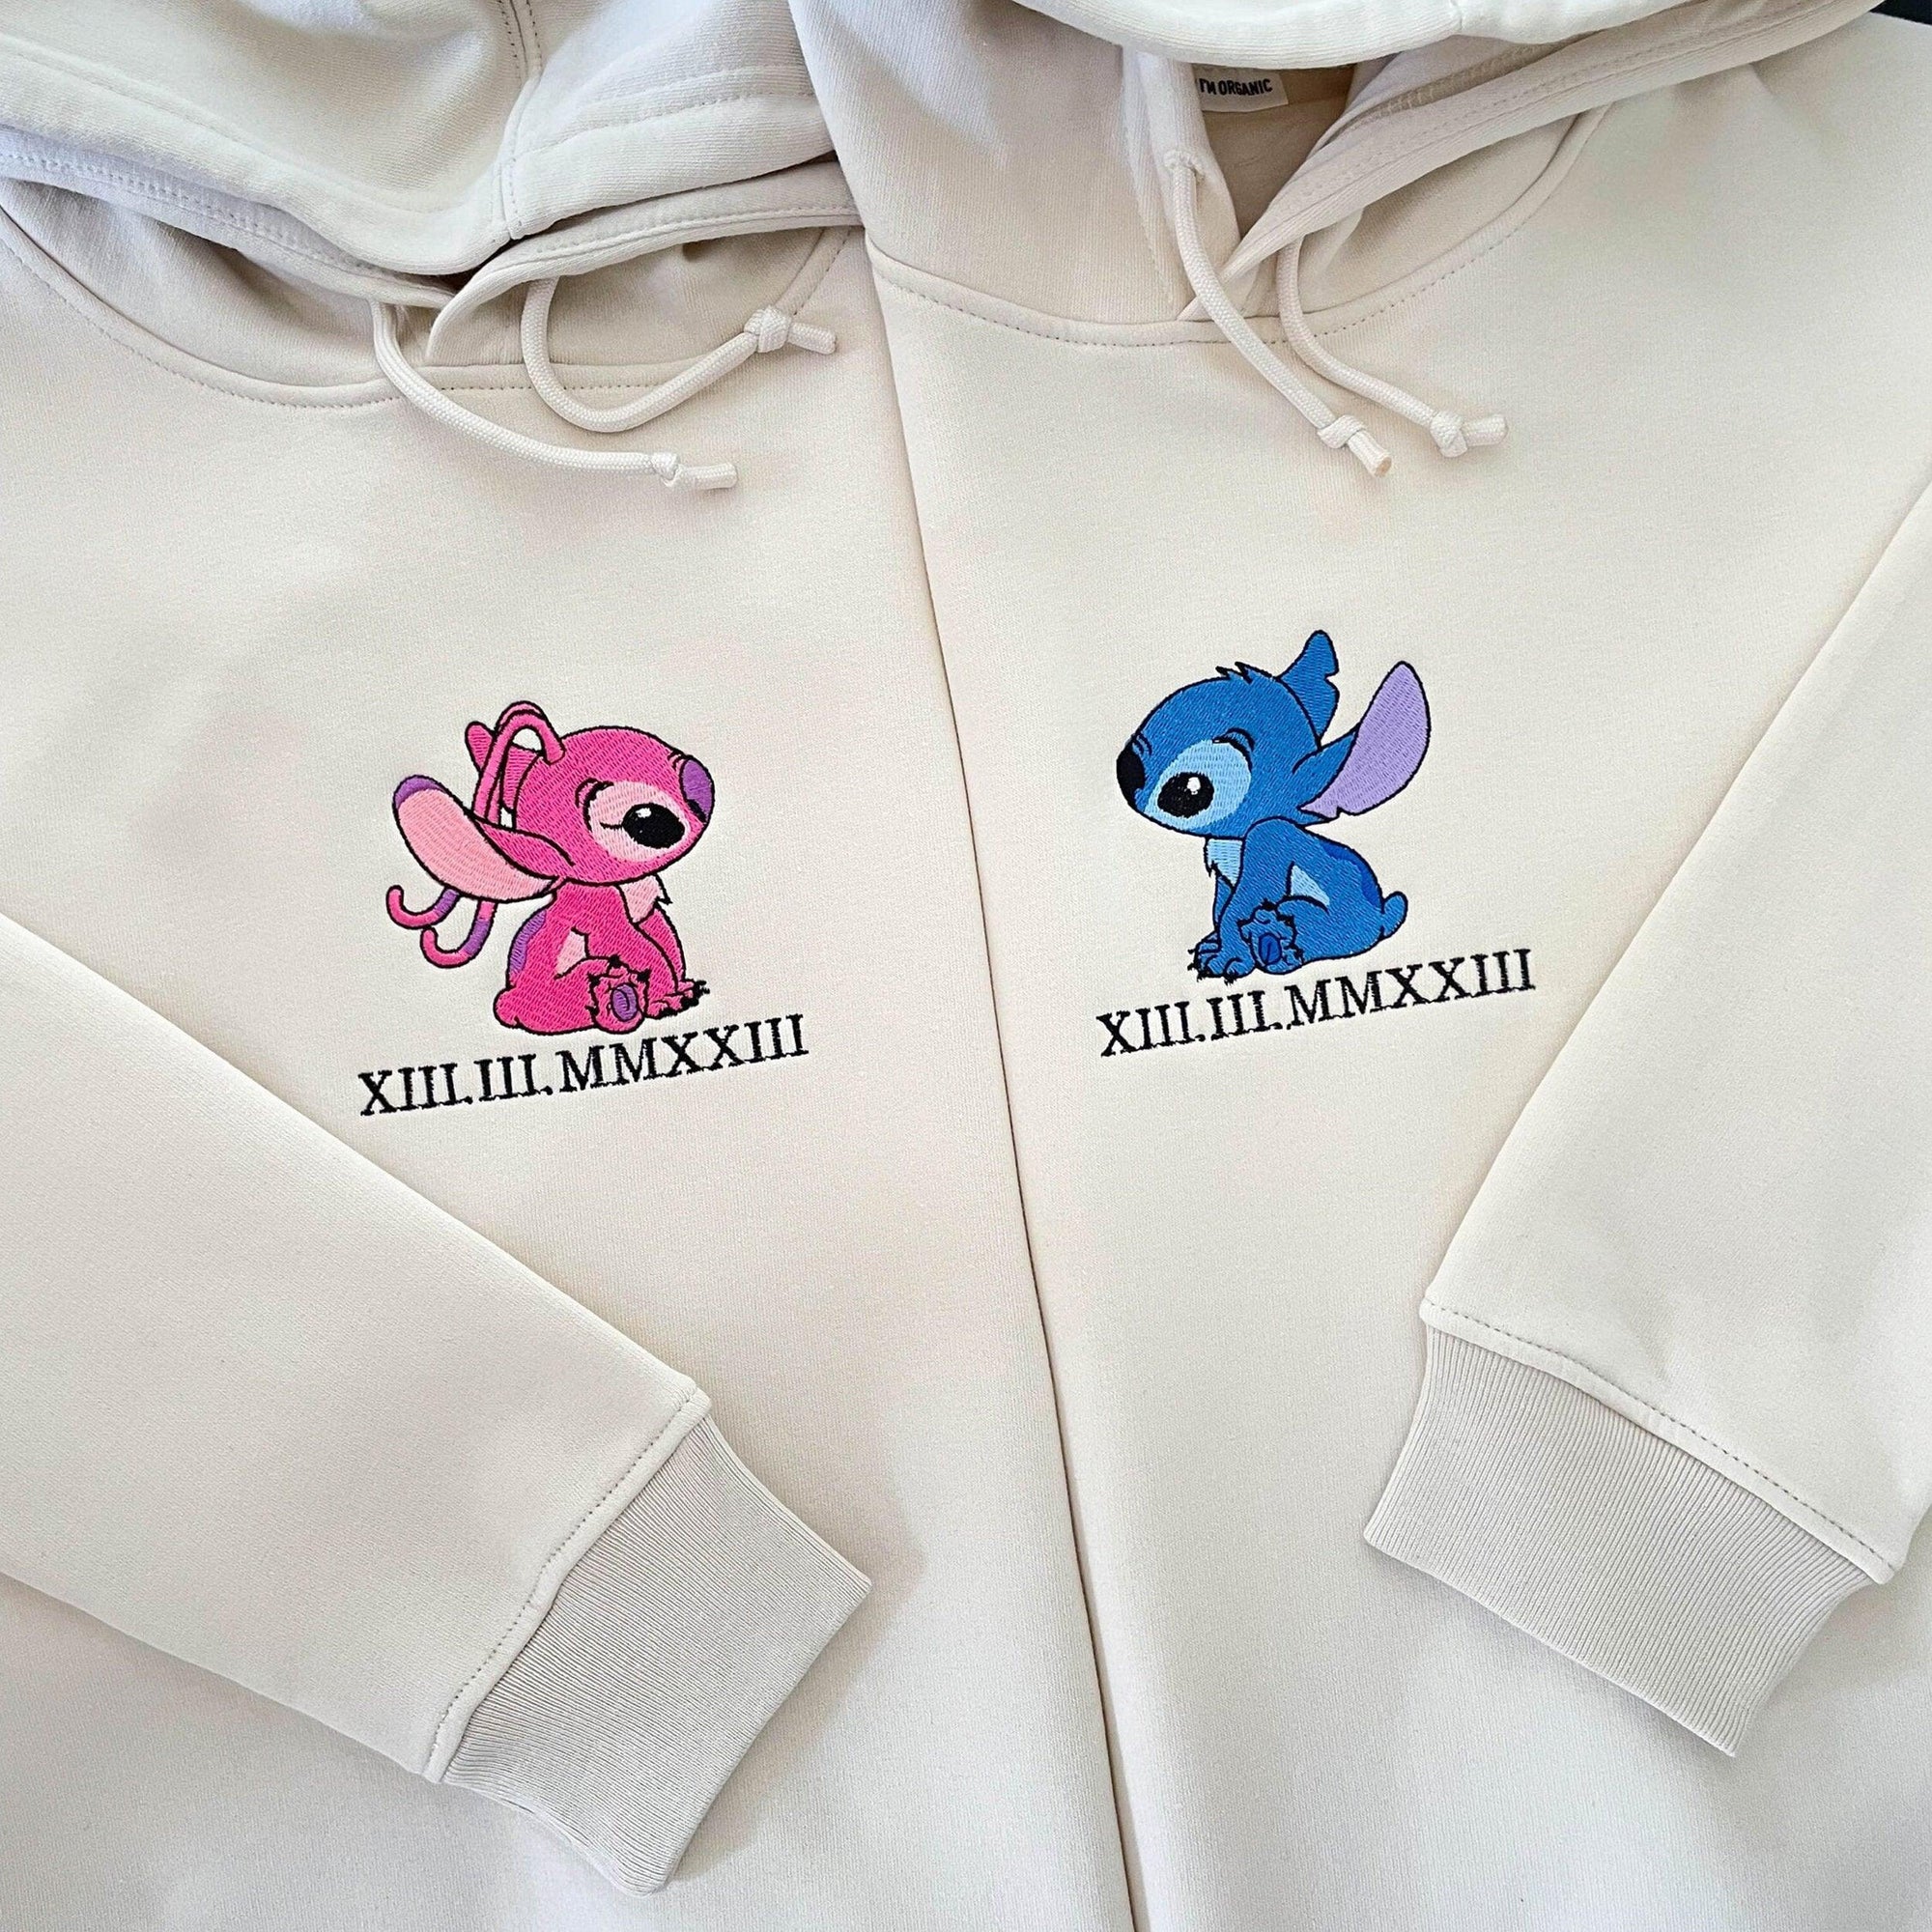 Custom Embroidered Sweatshirts For Couples, Custom Matching Couple Hoodies, Stitch Couples Roman Numeral Date Crewneck Embroidered Sweatshirt